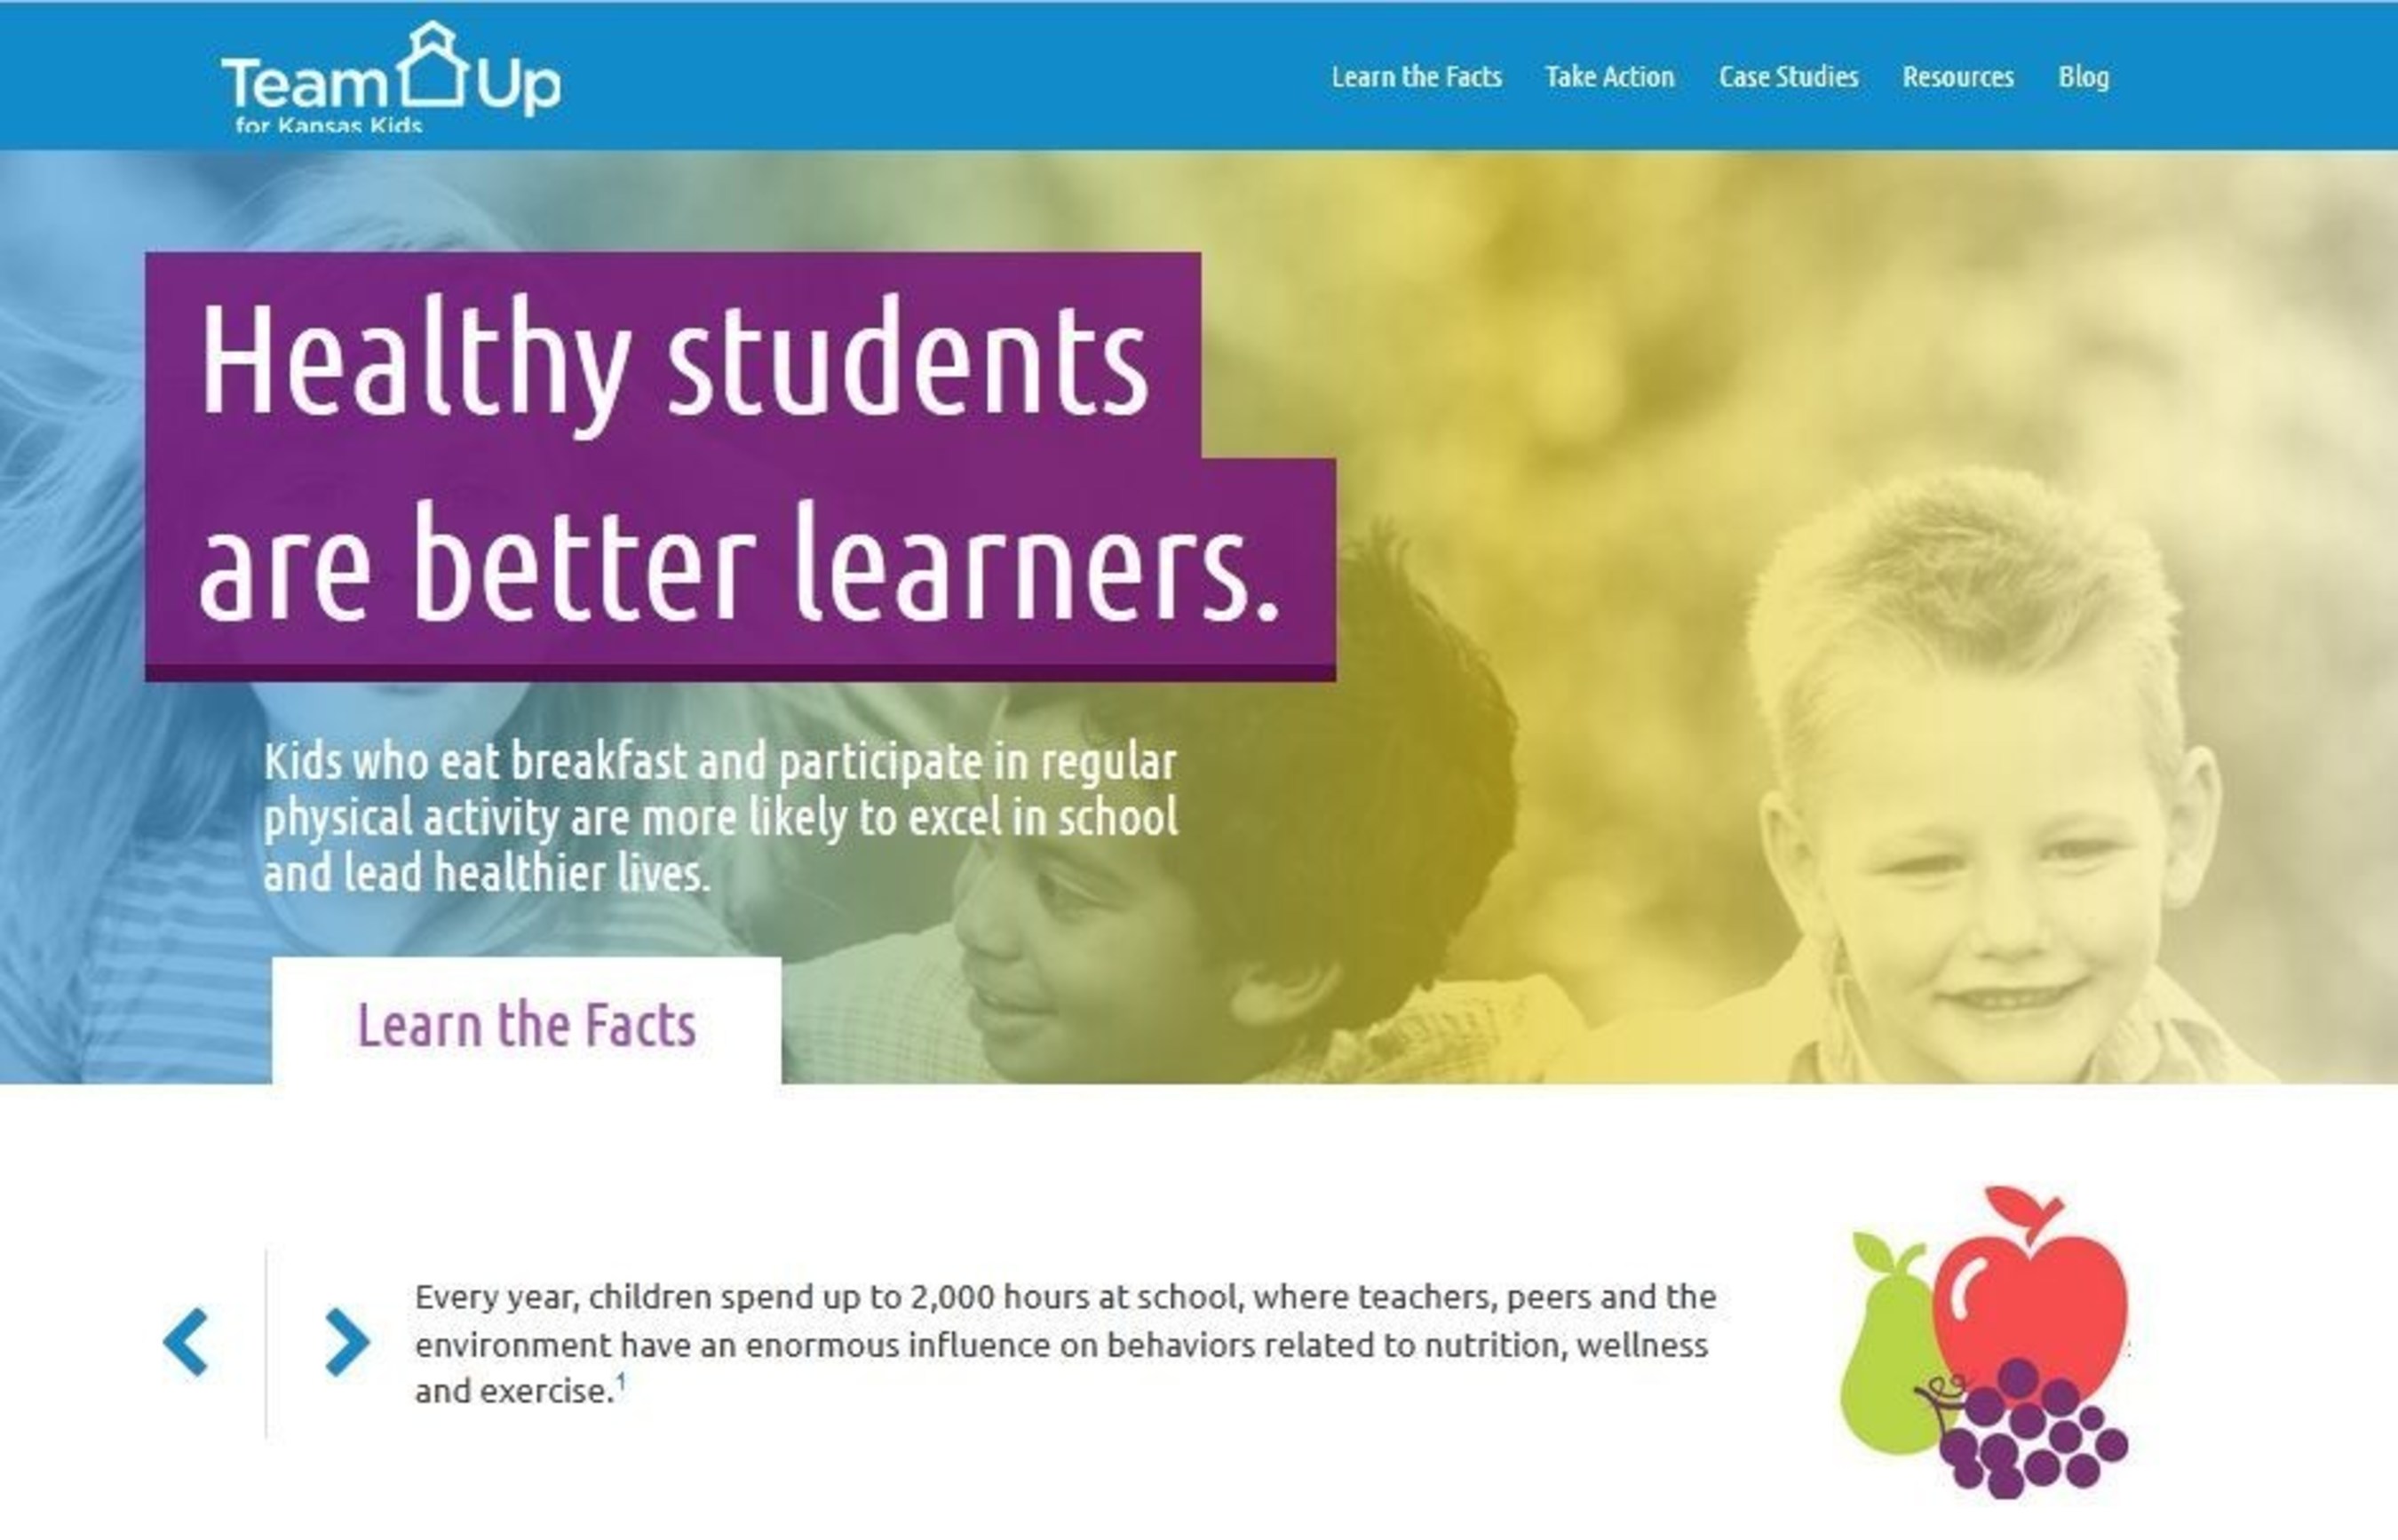 Homepage from teamupforkansaskids.com, which houses resources and best practices for families and school leaders to help improve school wellness across Kansas.